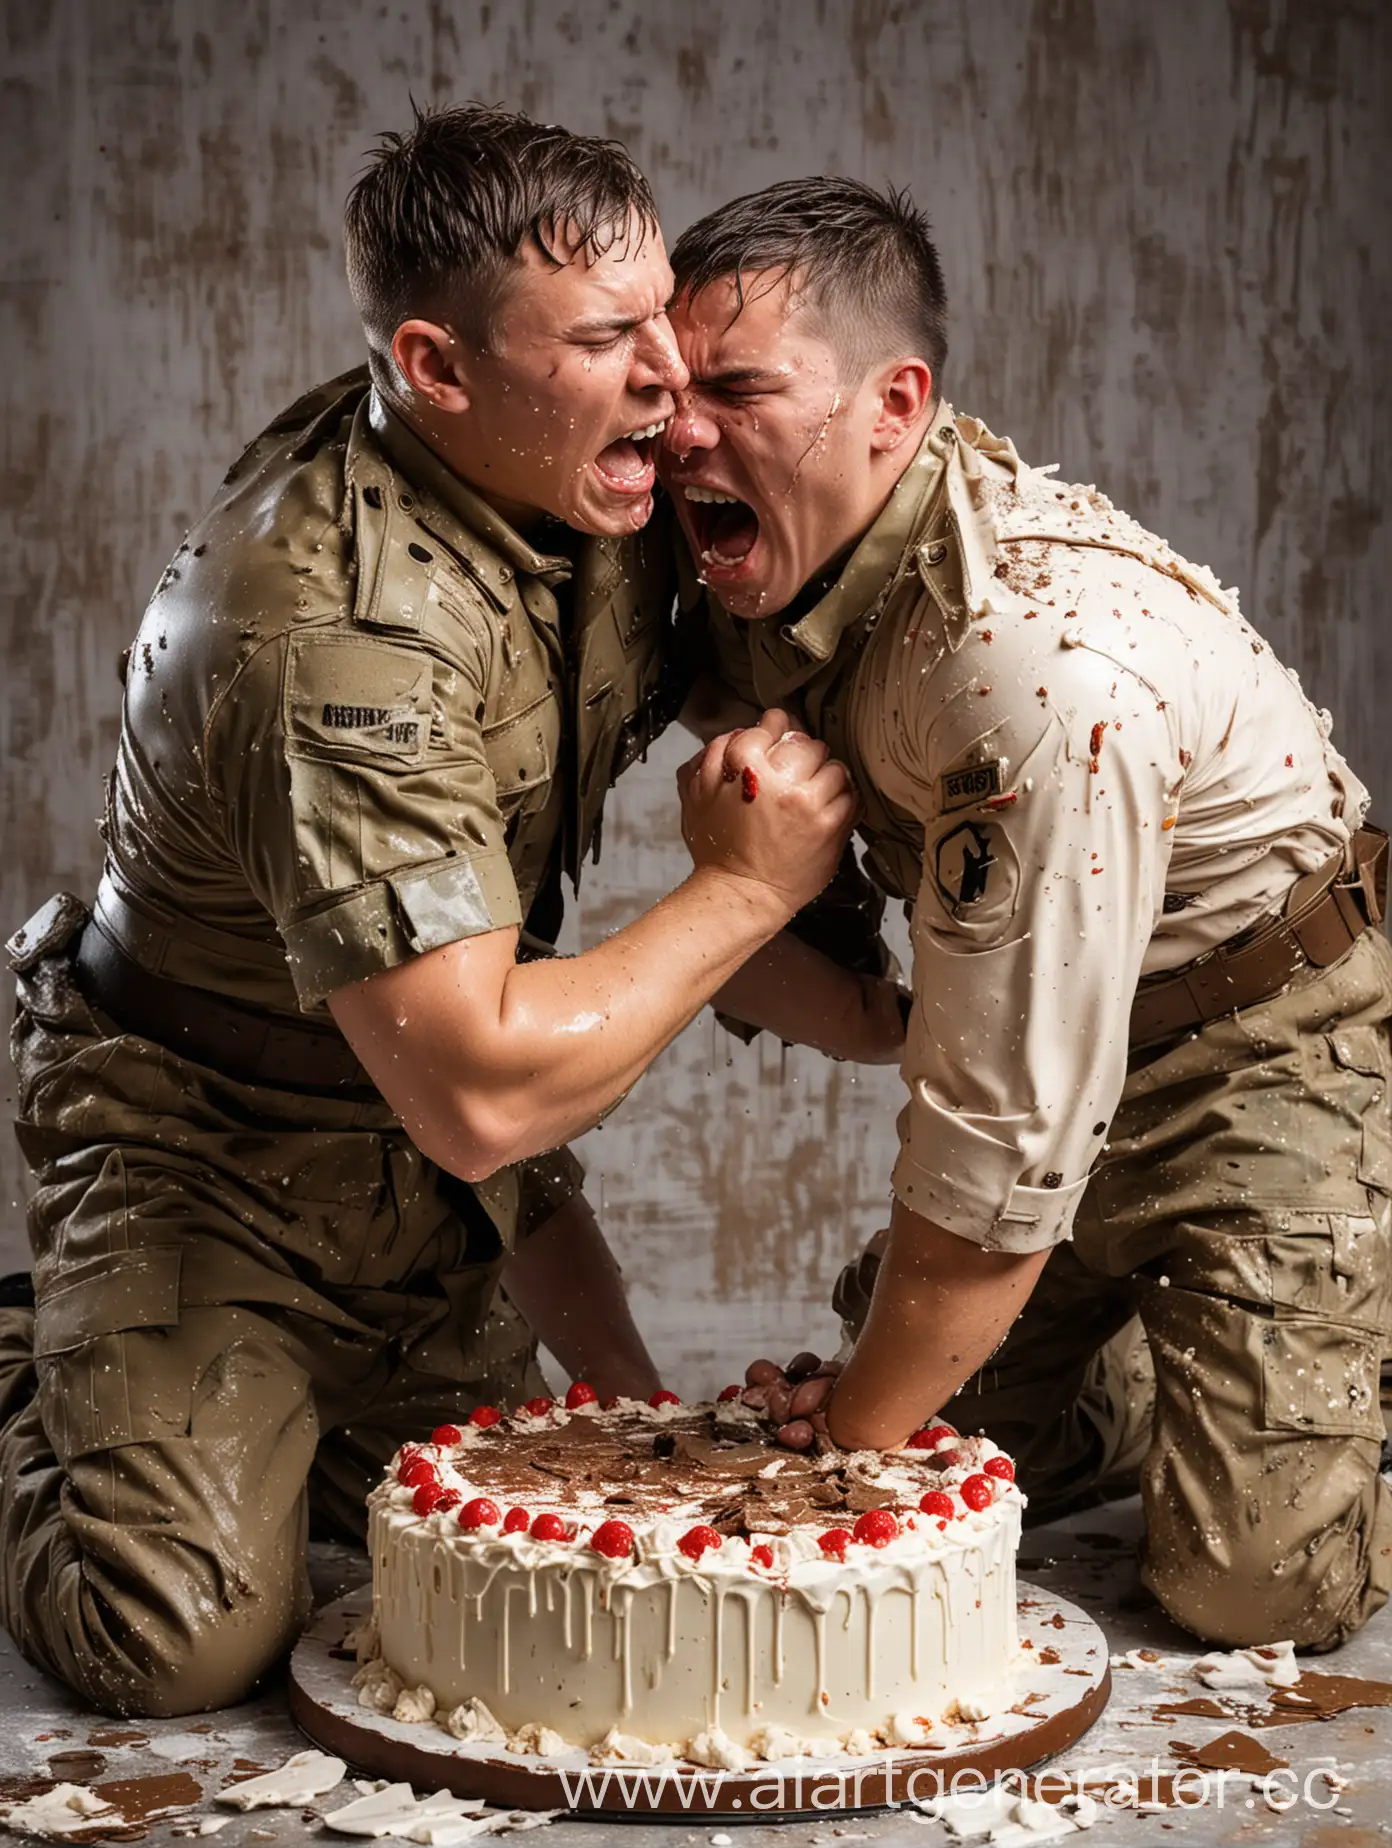 two uniformed soldier wrestle, impacts cake, hits cake, cake in ruin, face in cake, atractive face, wet dirty, uniform covered in cake and cream, fighting and wrestling, fist fight, pressing your face into the cake and cream, trampling the cake, back on the cake, back pocket, 